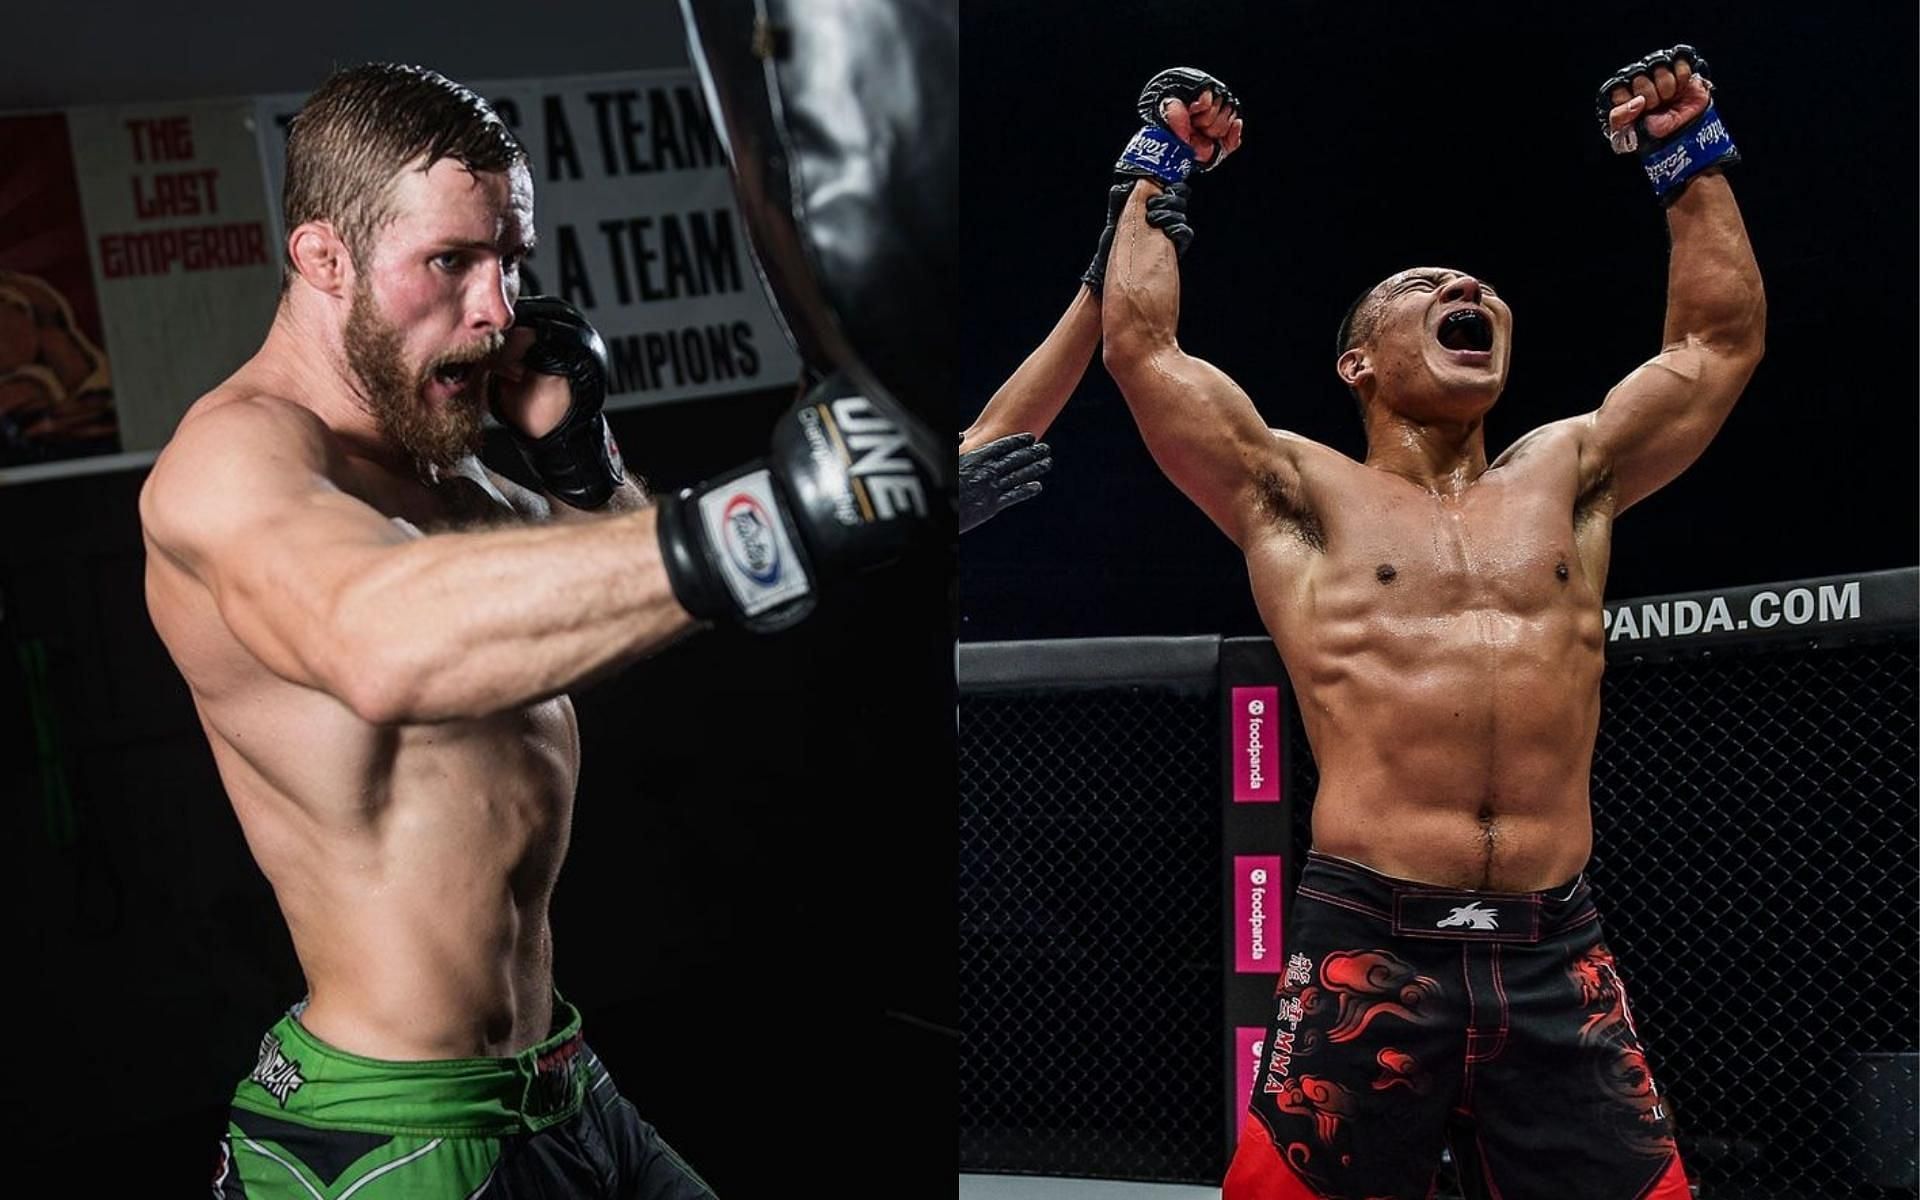 Former ONE Championship middleweight world champion Vitaly Bigdash (left) will face Fan Rong (right) at ONE: Winter Warriors II. (Images courtesy of ONE Championship)